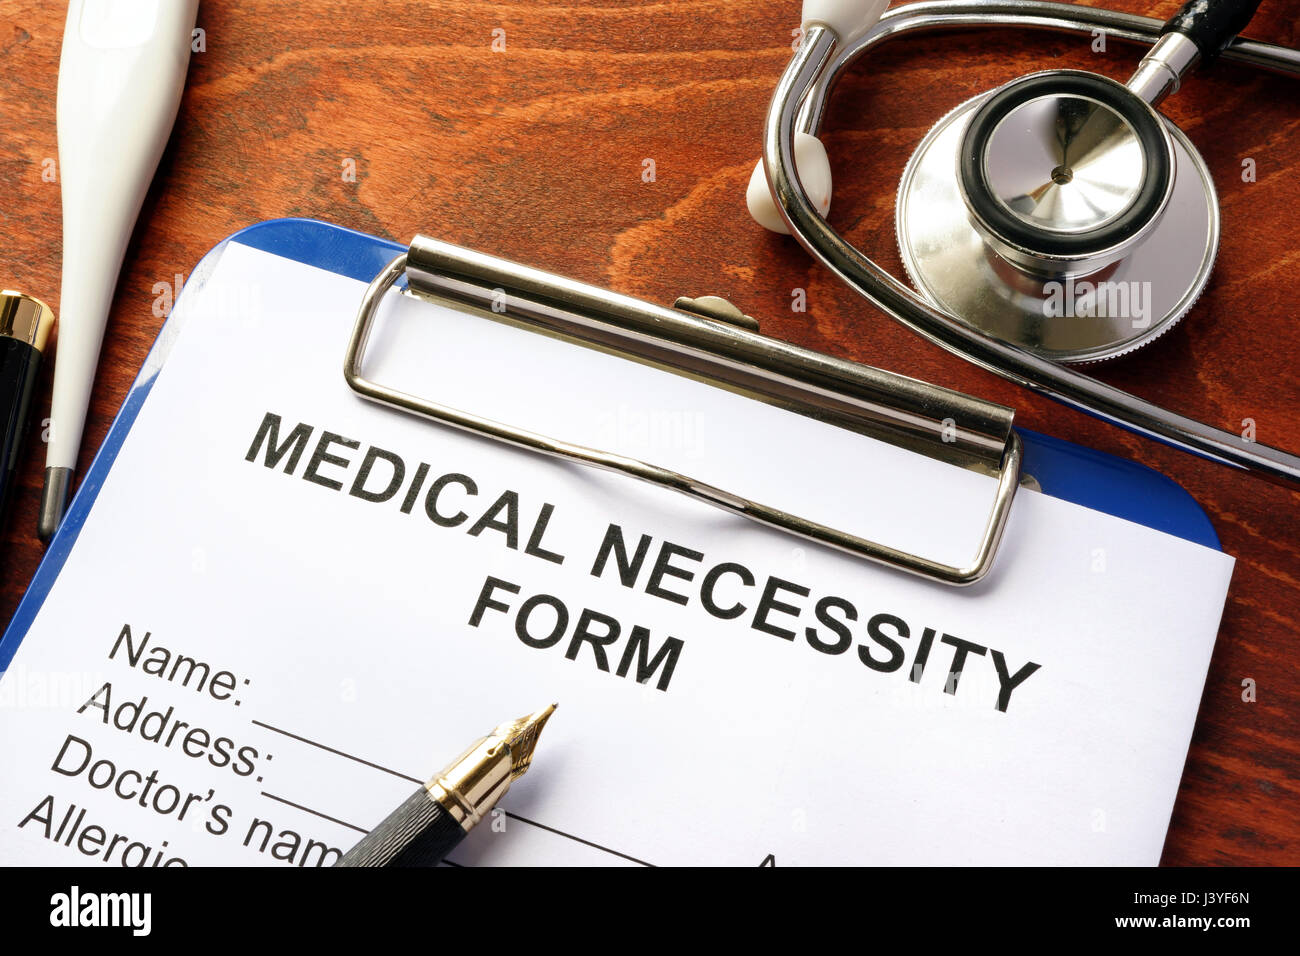 Medical Necessity form on a table. Stock Photo